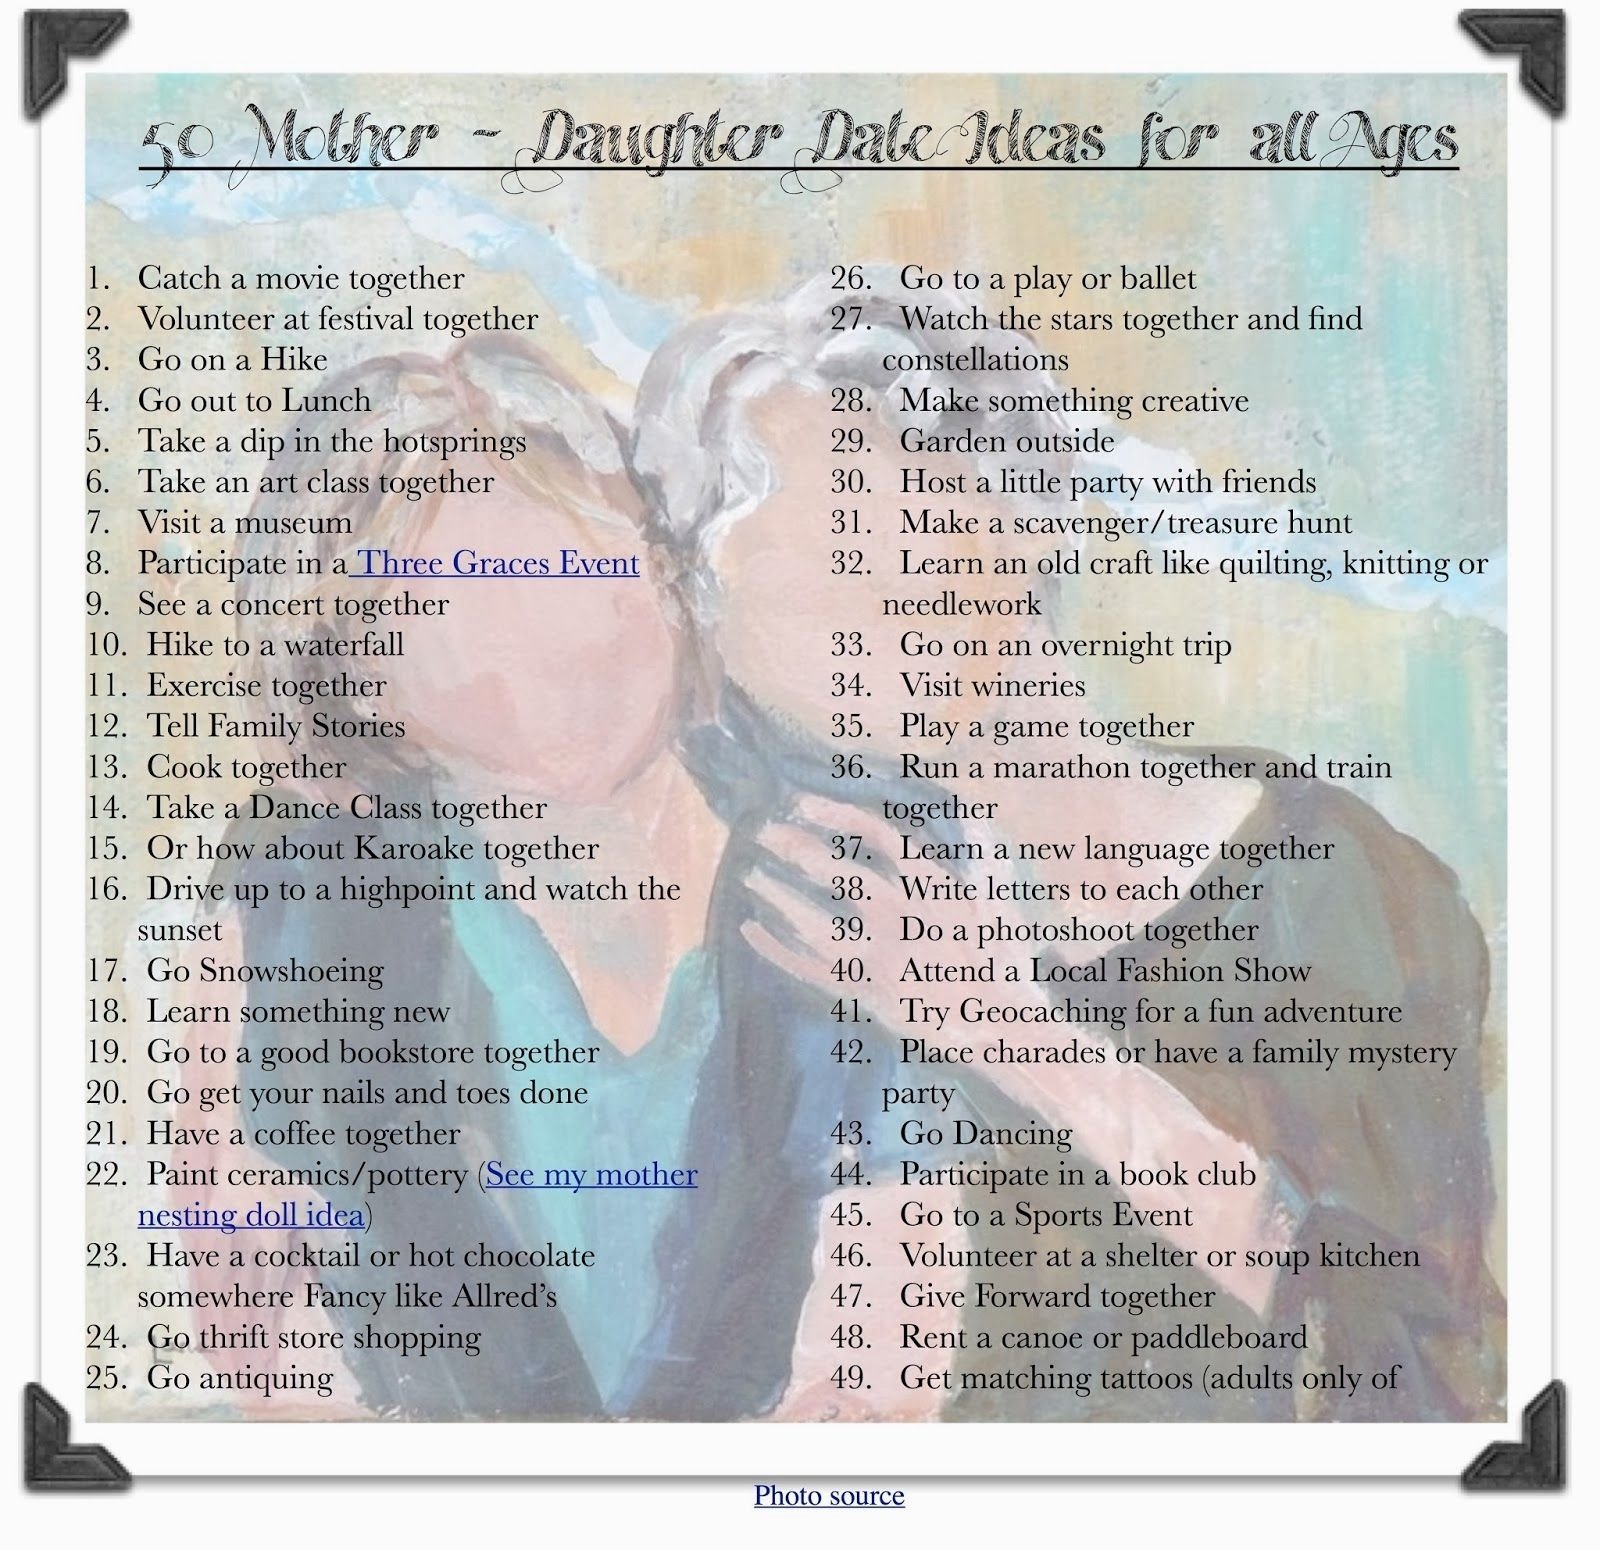 10 Stylish Mother Daughter Day Out Ideas a marmie life 50 mother daughter date ideas for all ages misc 2022